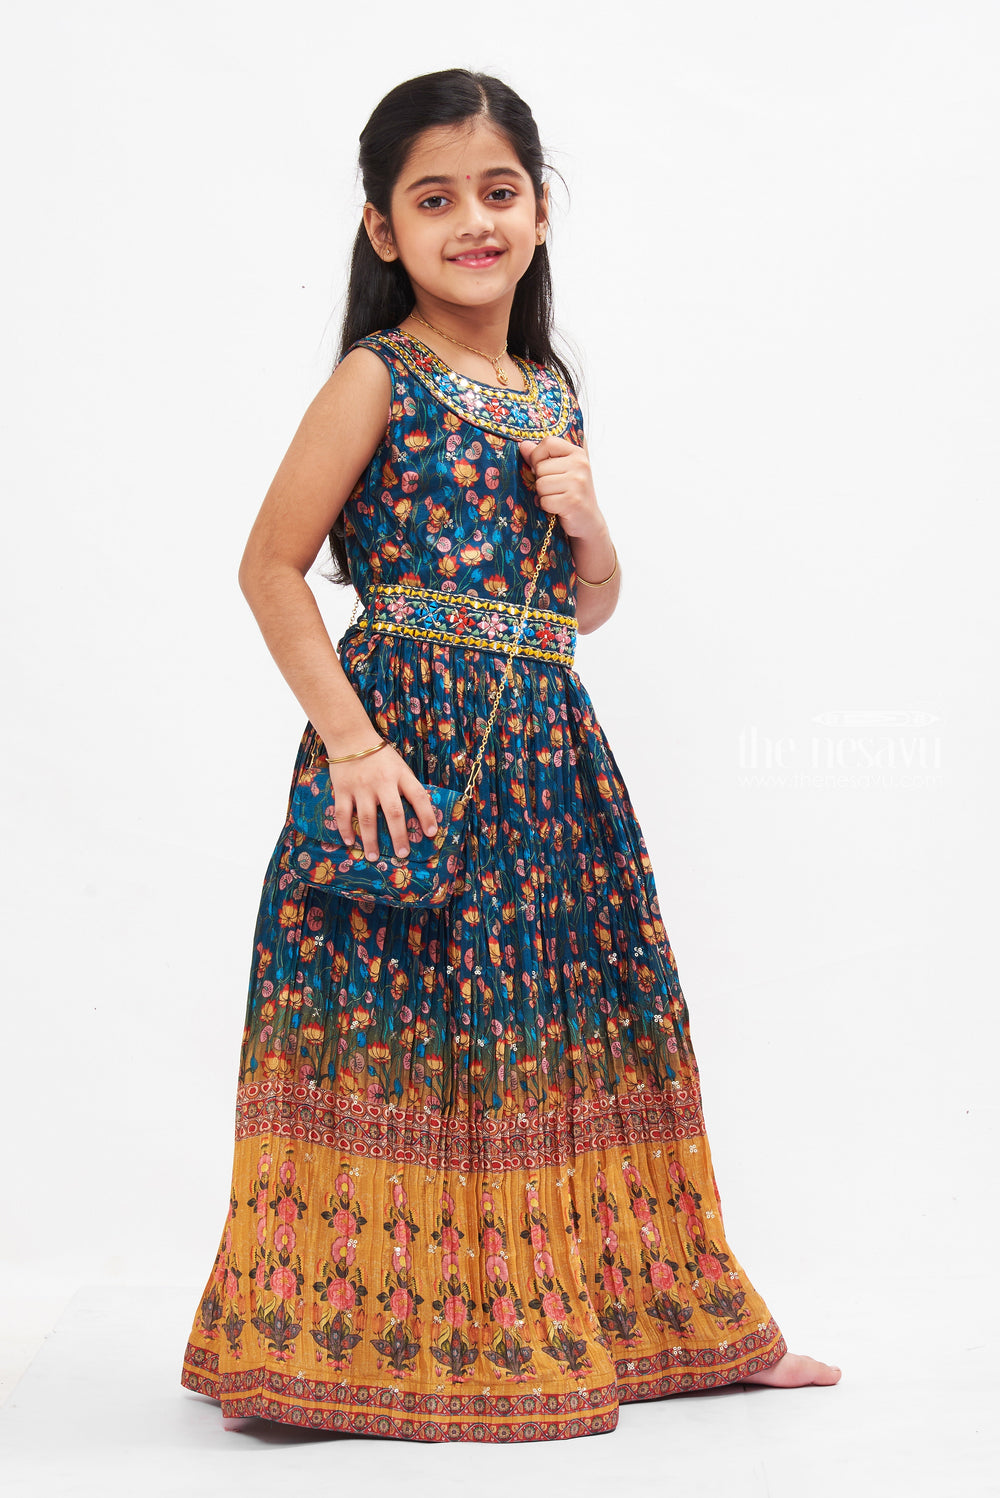 The Nesavu Girls Party Gown Ethnic Floral Fusion Anarkali Dress: Girls Boho-Chic Navy and Mustard Delight Nesavu Girls Navy & Mustard Anarkali Dress | Floral Bohemian Style | The Nesavu